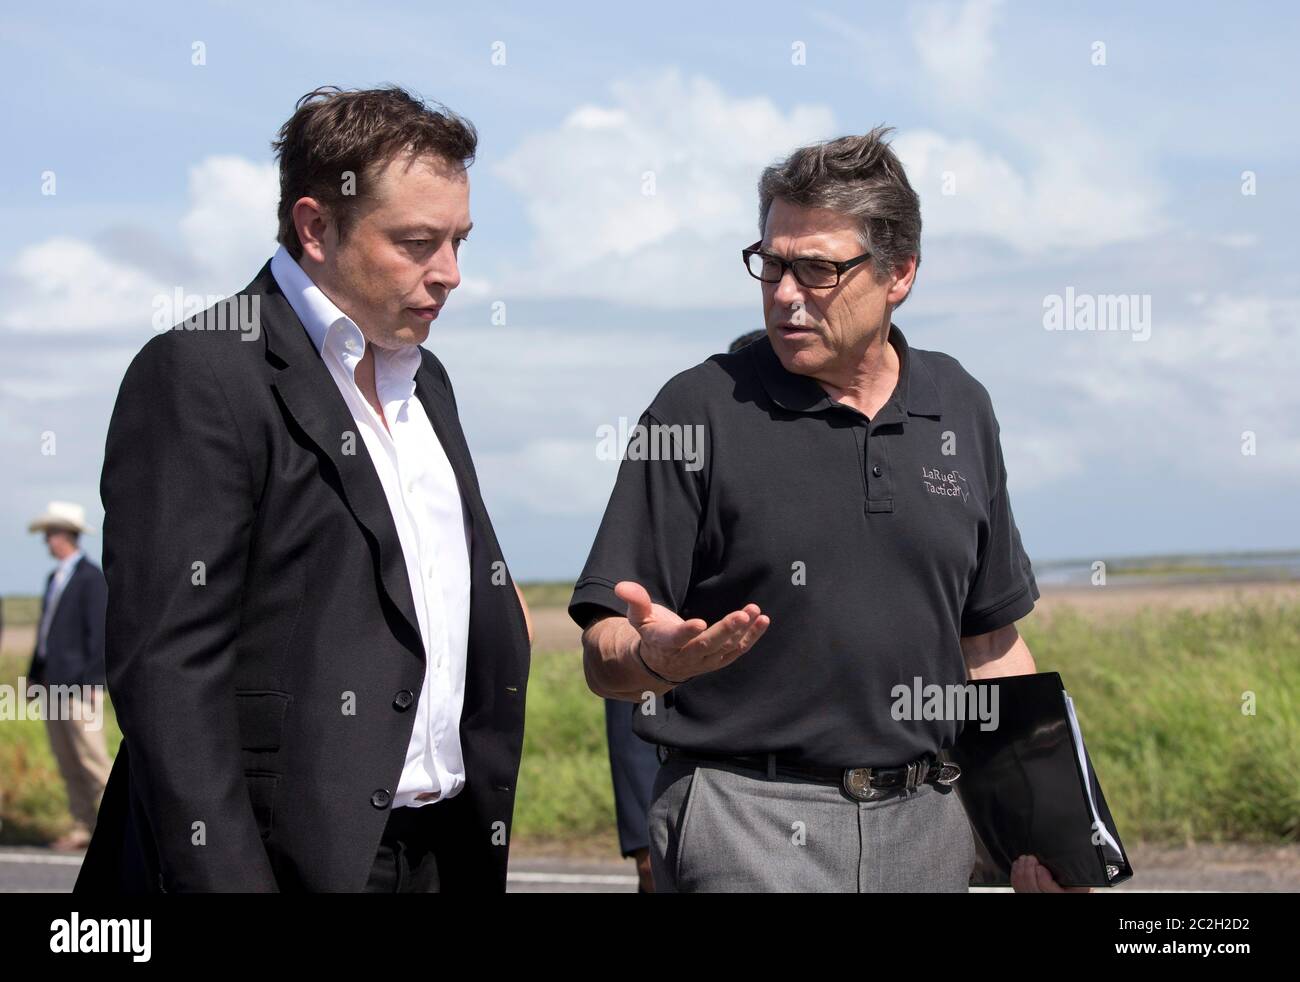 Boca Chica Texas USA, September 23 2014: SpaceX CEO Elon Musk (left) chats with Texas Gov. Rick Perry as they walk to the groundbreaking ceremony on the site of the company's new space port in far south Texas. The remote site east of Brownsville, Texas is two miles from the mouth of the Rio Grande River and Texas' border with Mexico.  ©Bob Daemmrich Stock Photo